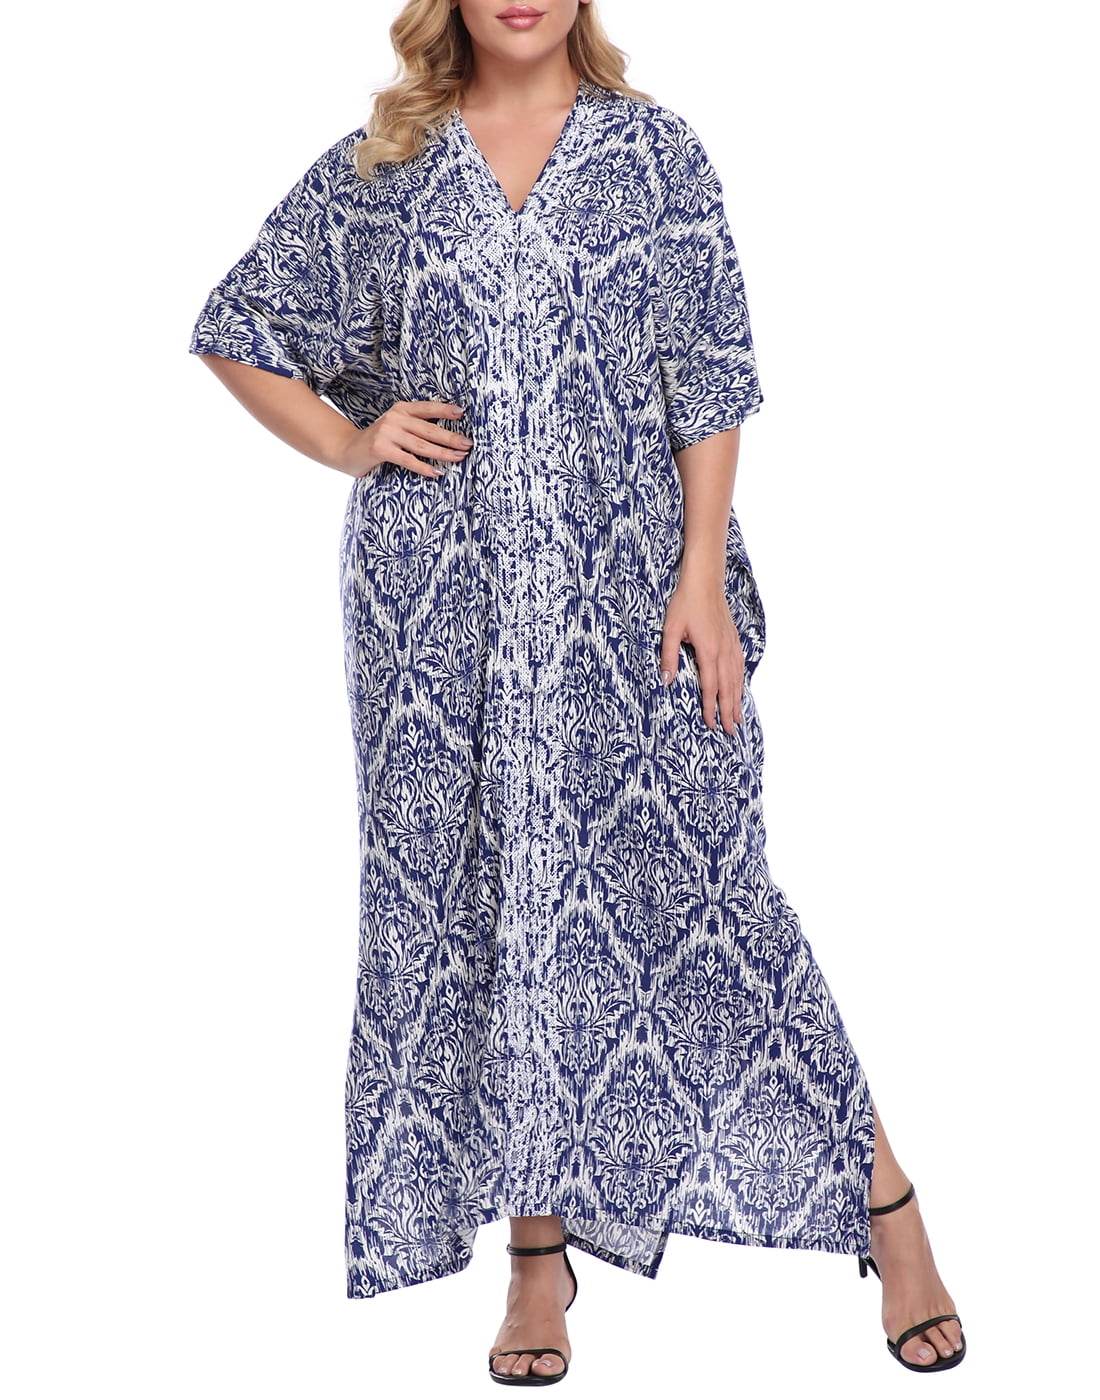 Free Size Kaftan Holiday Dress Beach Cover up fits 14,16,18,20,22,24 